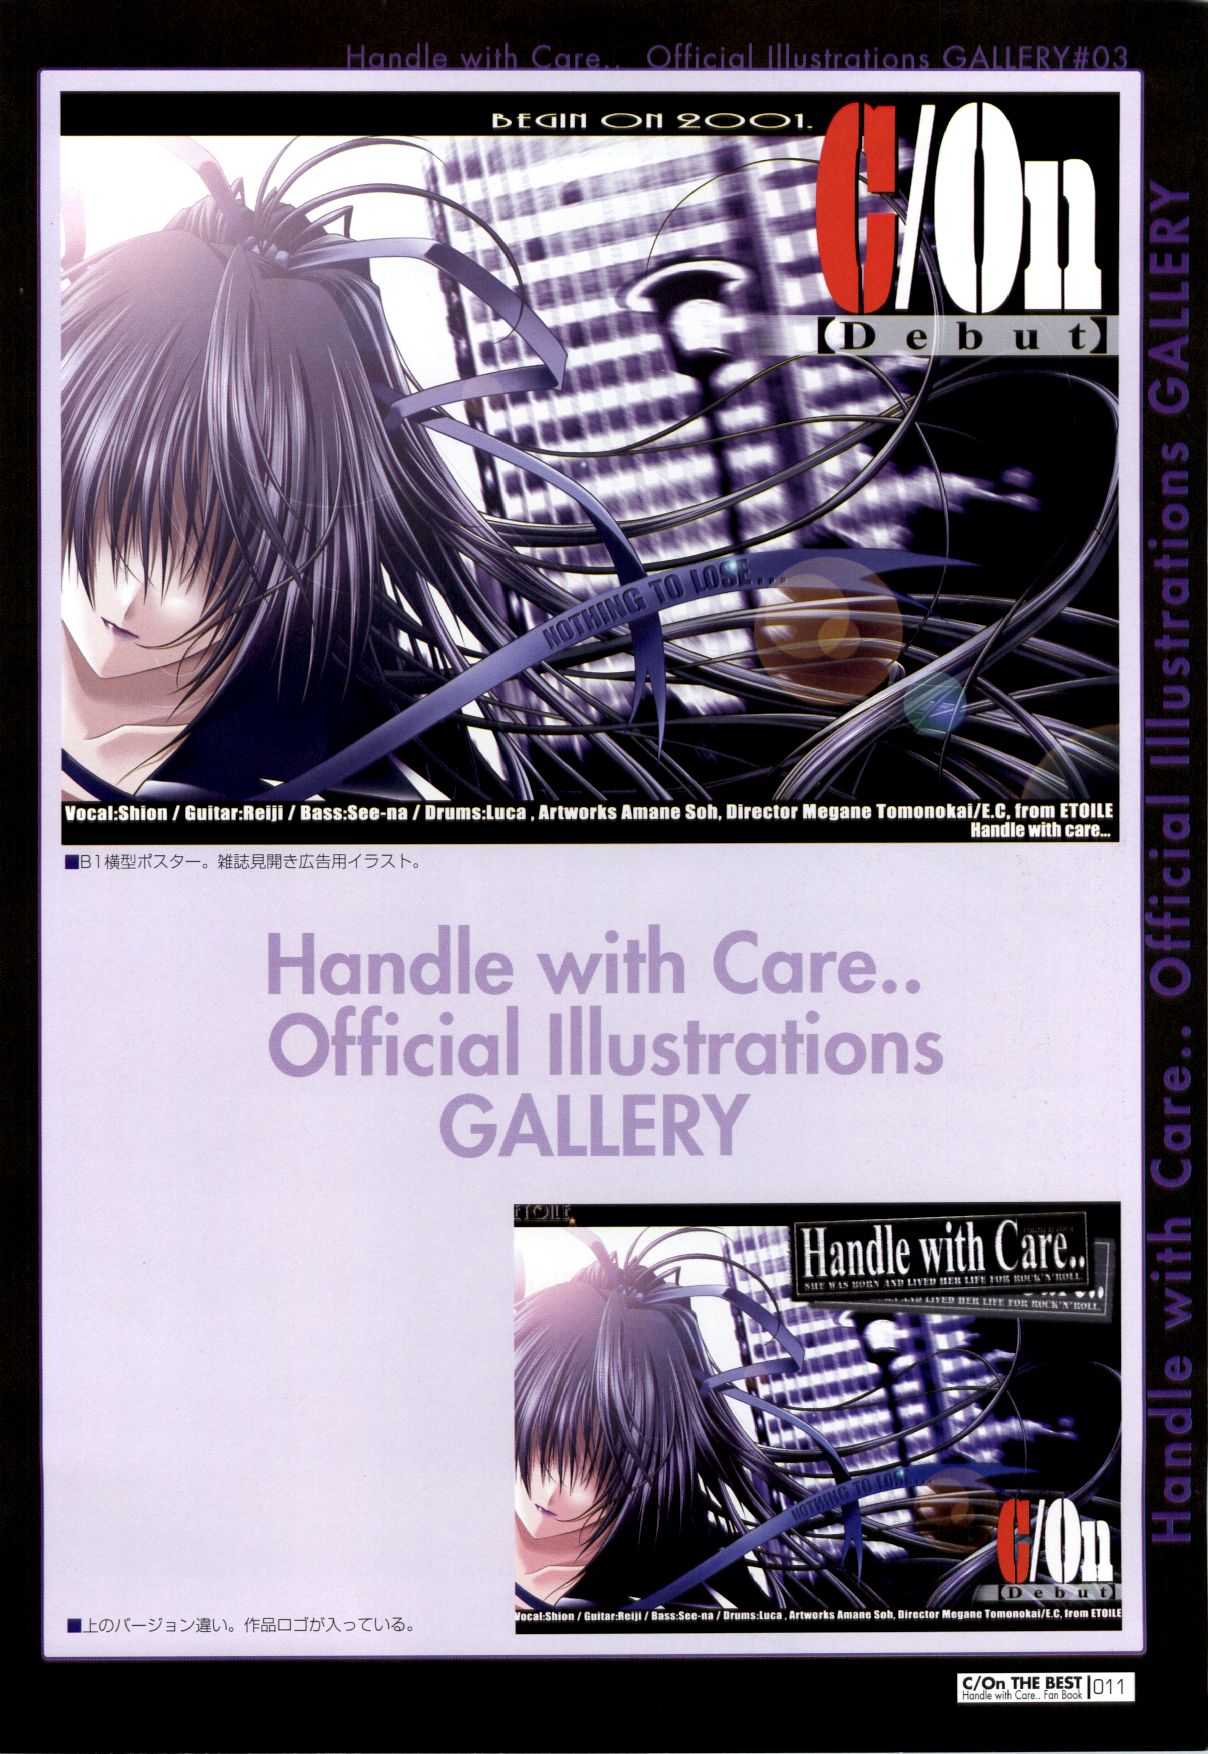 [ETOILE] C/On THE BEST Handle with Care... OFFICIAL FAN BOOK [ETOILE] C/On THE BEST Handle with Care... OFFICIAL FAN BOOK